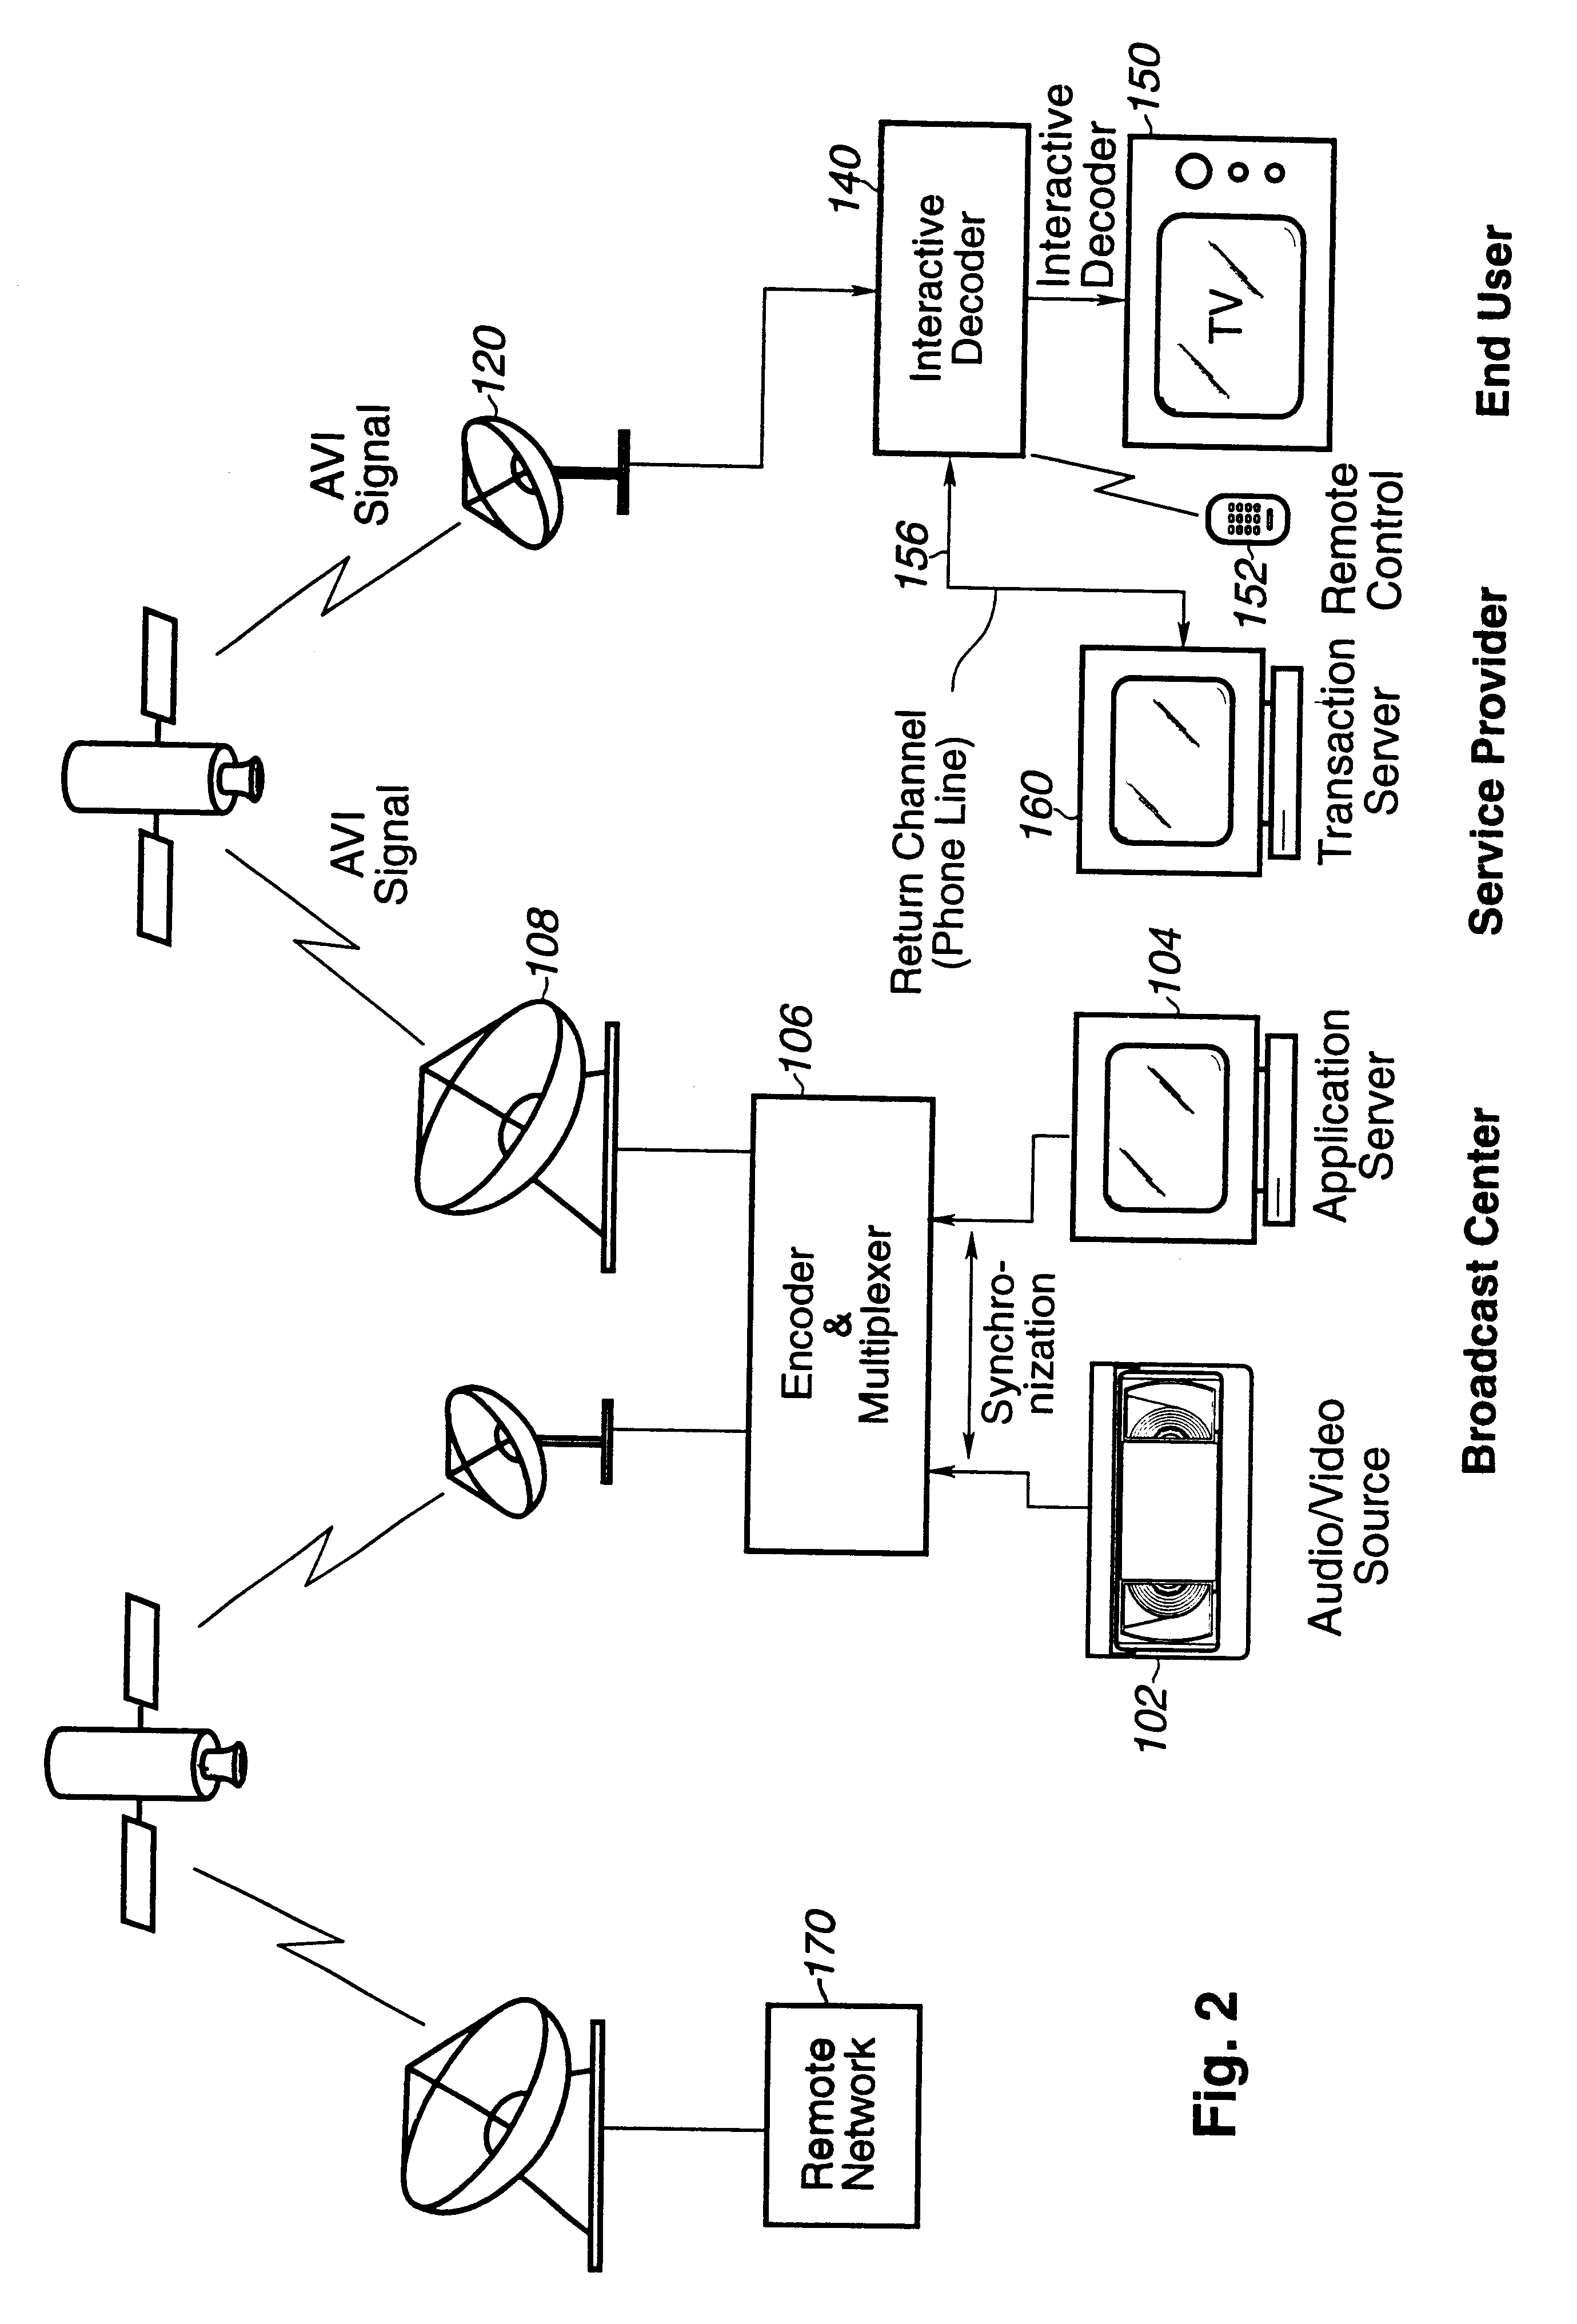 Interactive television system and method for displaying web-like stills with hyperlinks